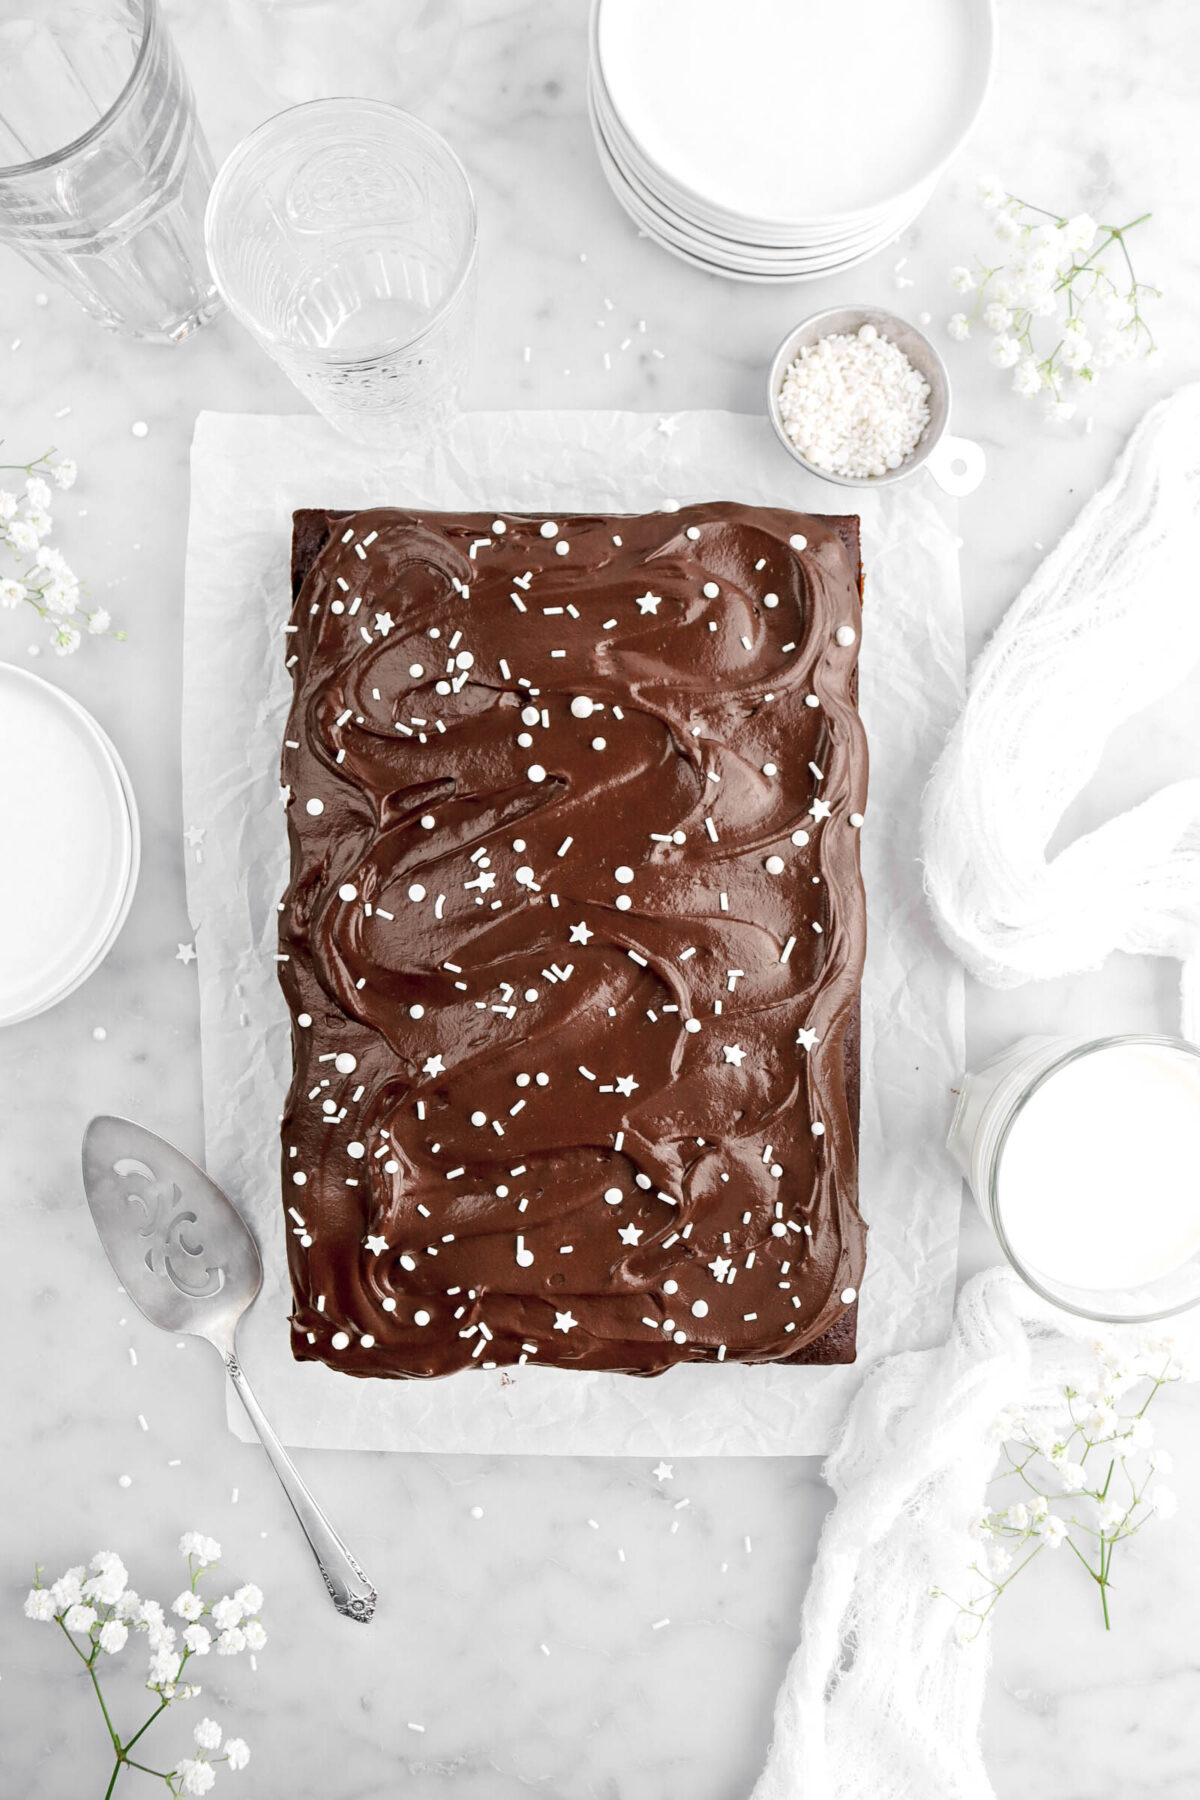 pulled back overhead shot of chocolate sheet cake frosted with chocolate frosting with white sprinkles on top, with cake on crumbled parchment paper with sprinkles and white flowers around, empty glasses, white plates, a glass of milk, a cake knife, and white cheesecloth beside cake on marble surface.